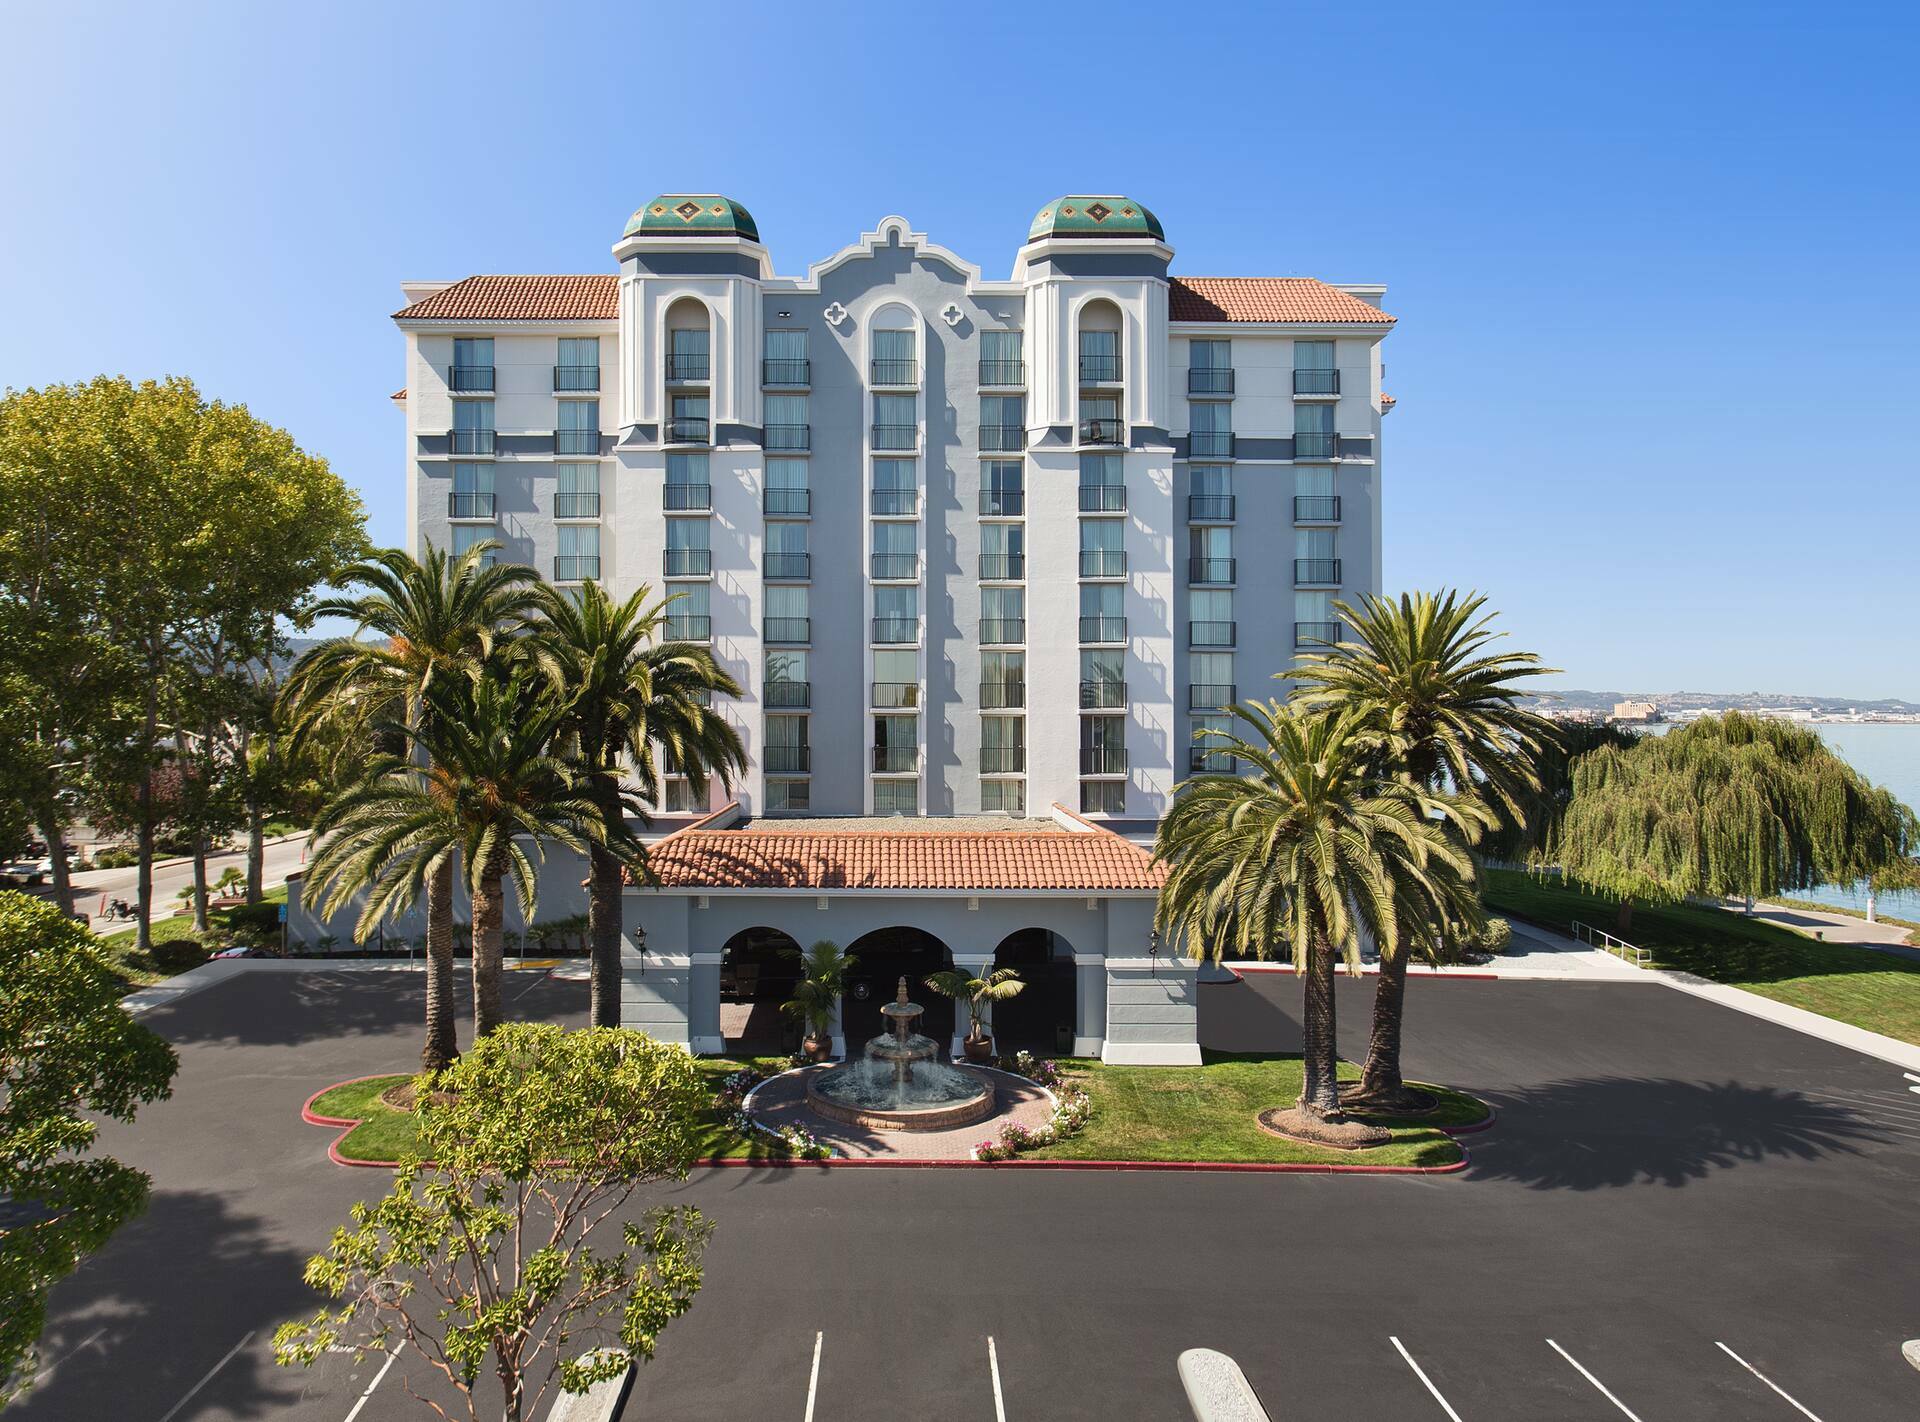 Photo of Embassy Suites by Hilton San Francisco Airport Waterfront, Burlingame, CA